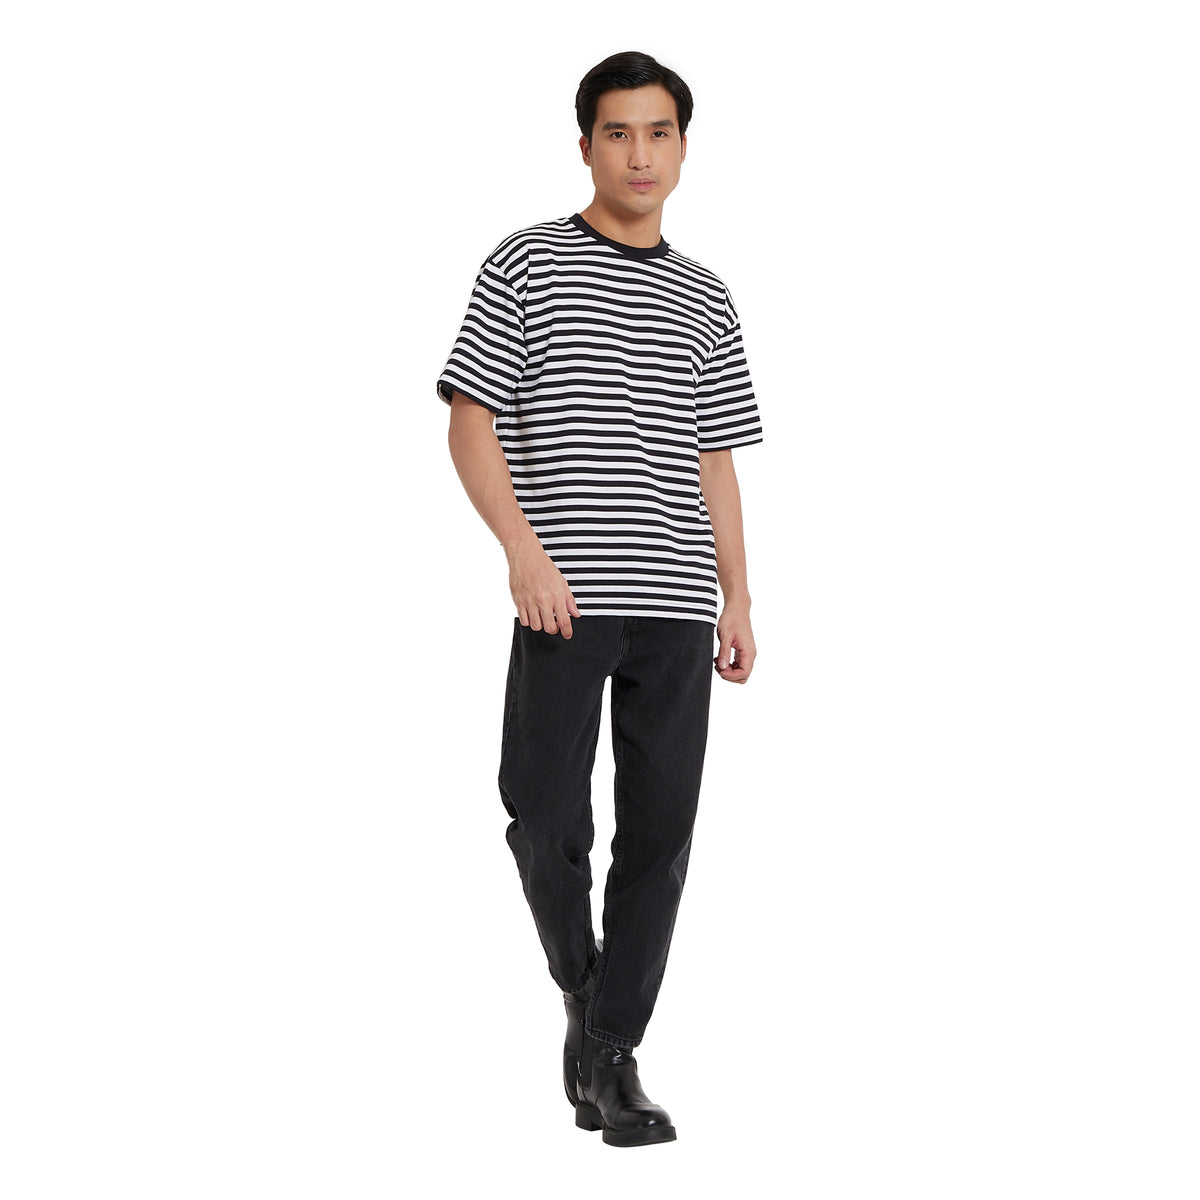 Cubic Men Basic Stripes  Oversized Boxy Tee / Box Fit T shirt Top Top for Men - CMBOS02R